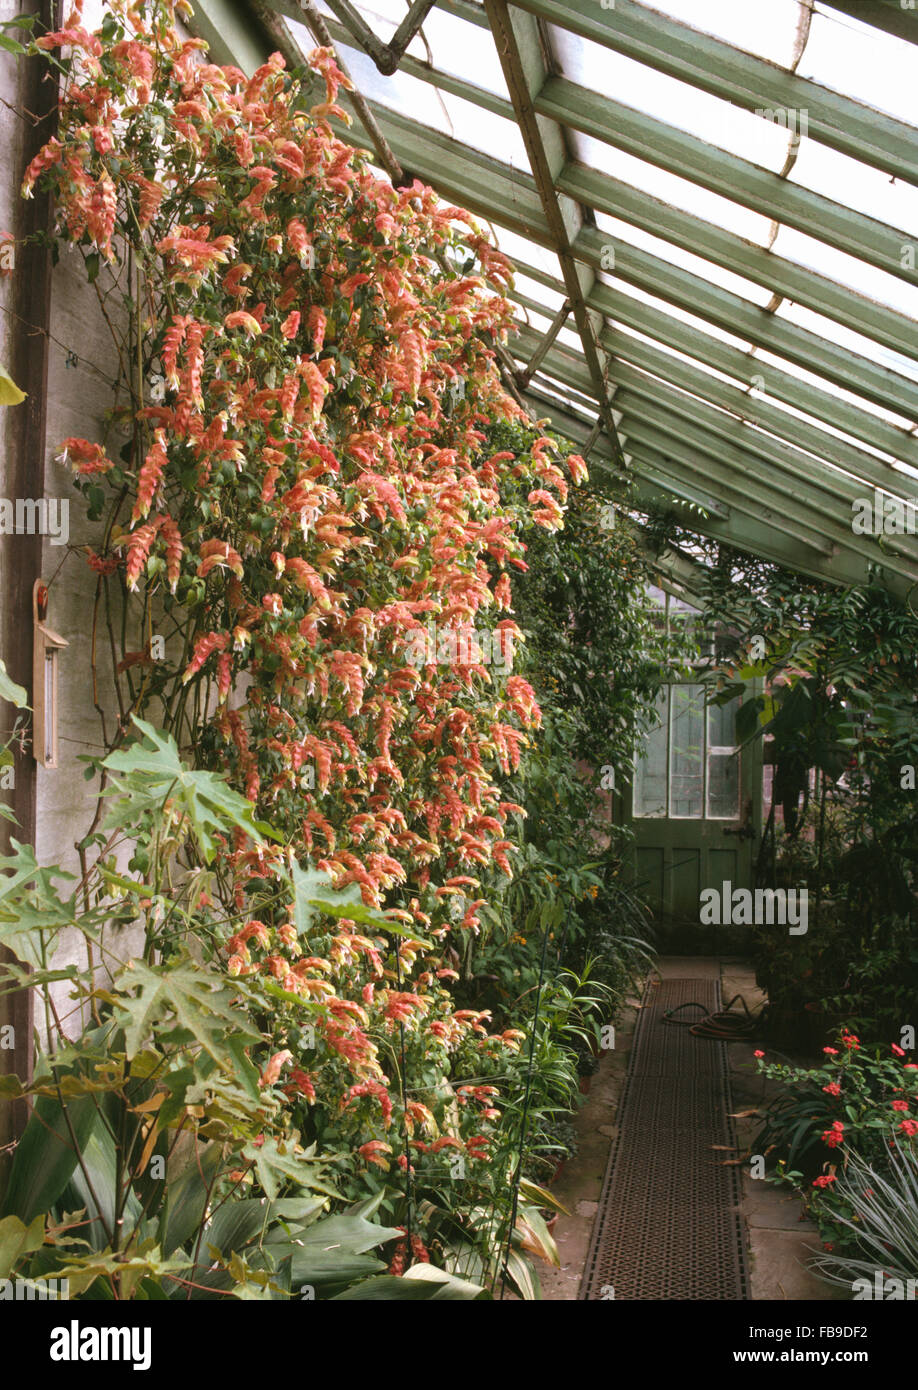 Justicia brandegeeana (shrimp plant) growing in a greenhouse Stock Photo